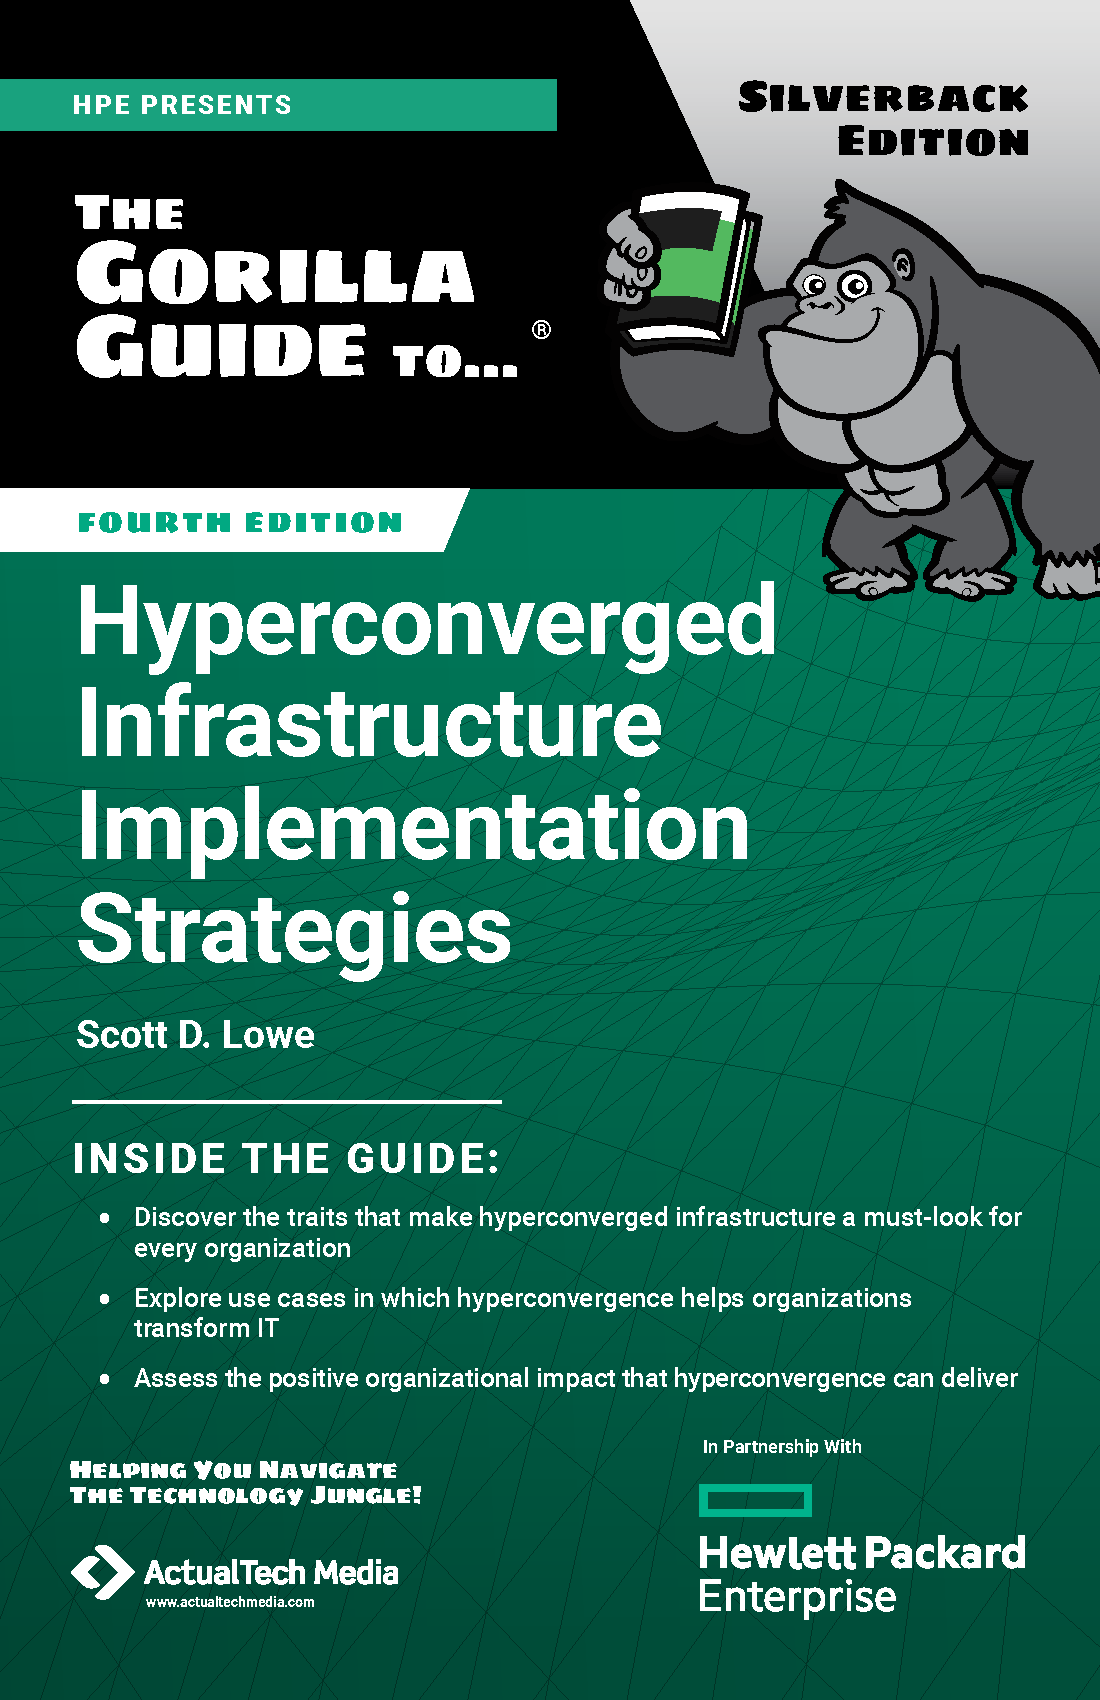 Pages from HPE the gorilla guide